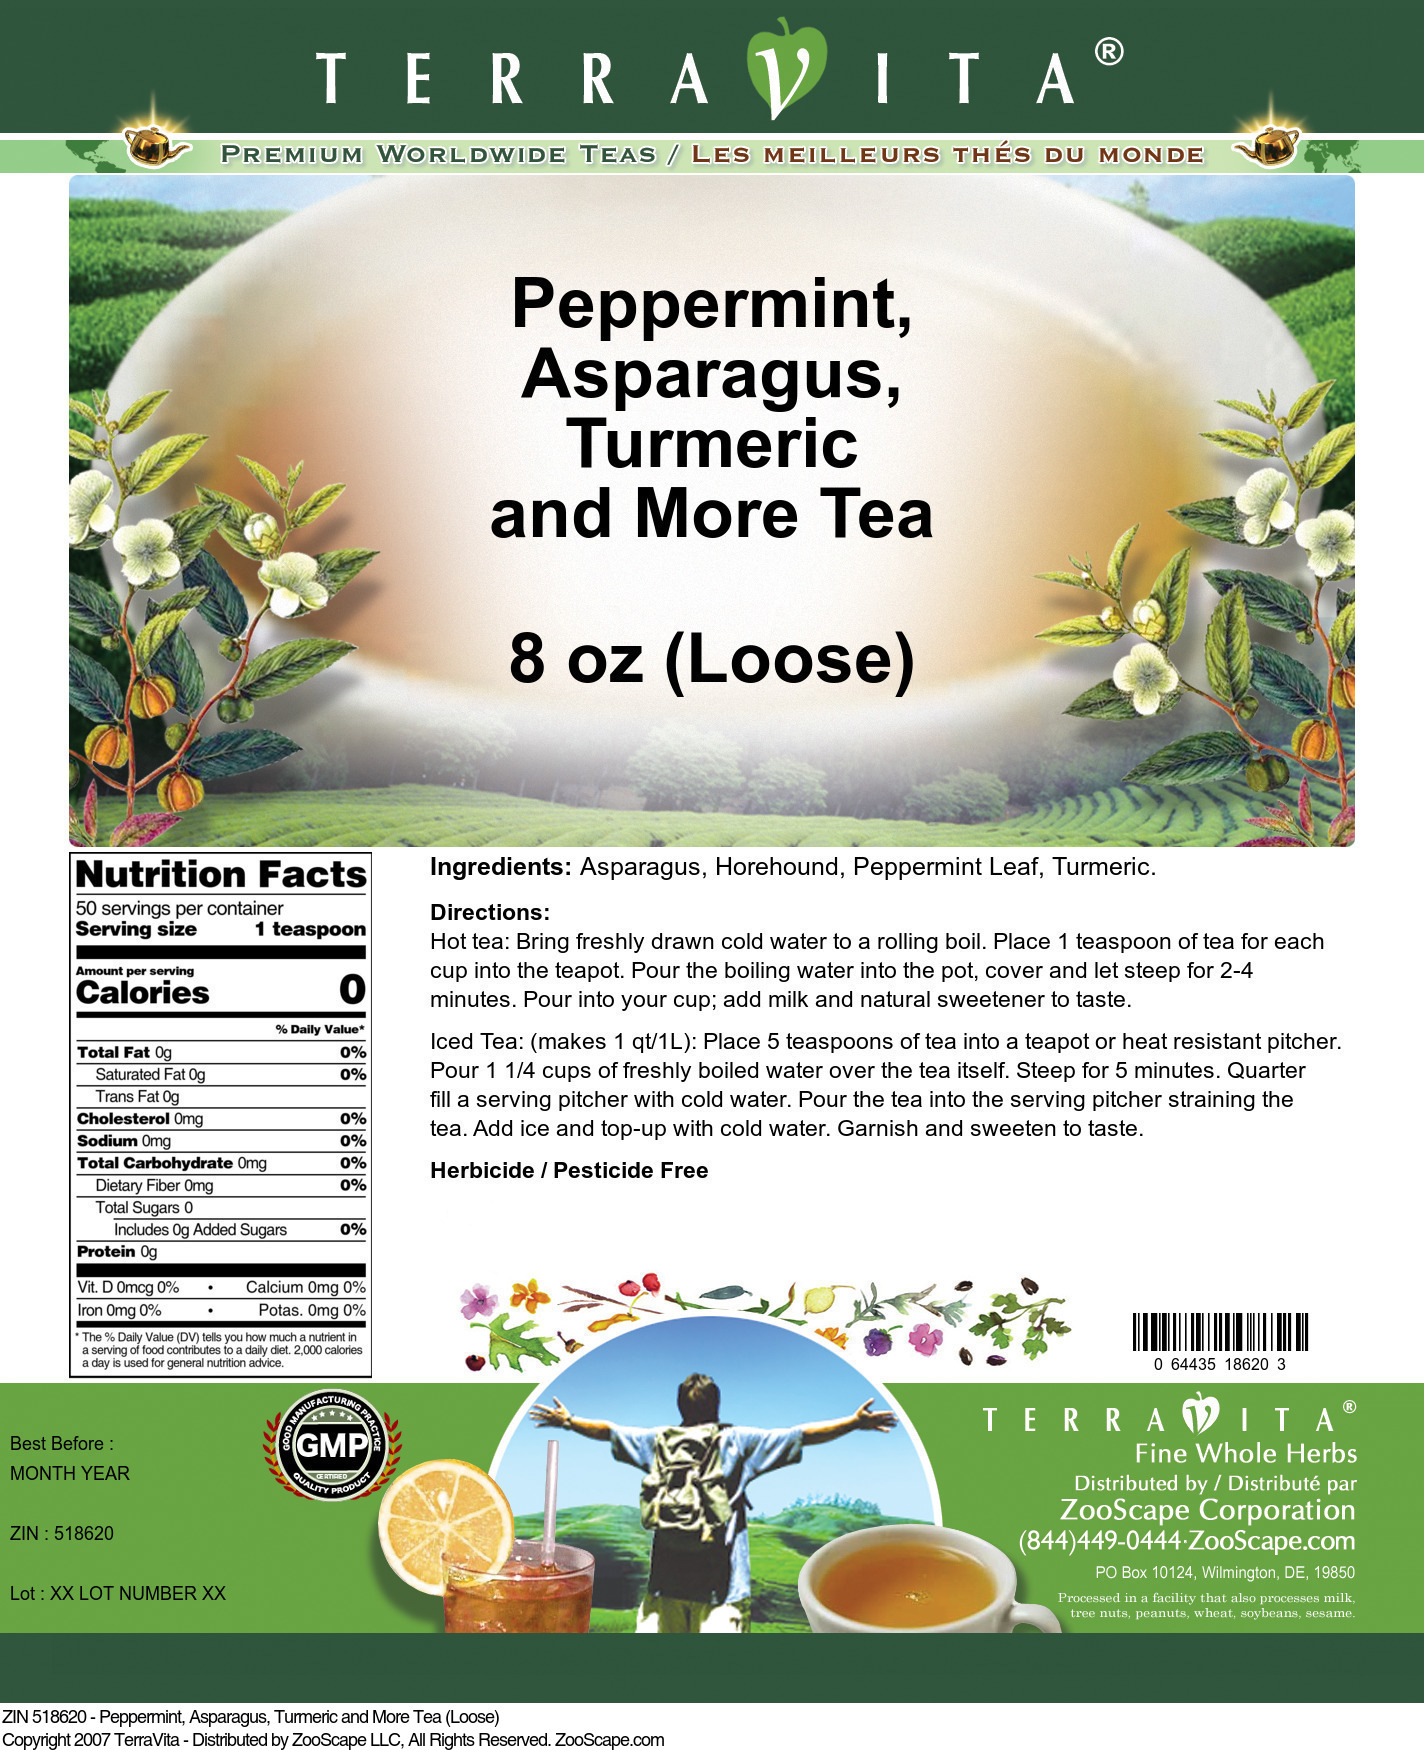 Peppermint, Asparagus, Turmeric and More Tea (Loose) - Label